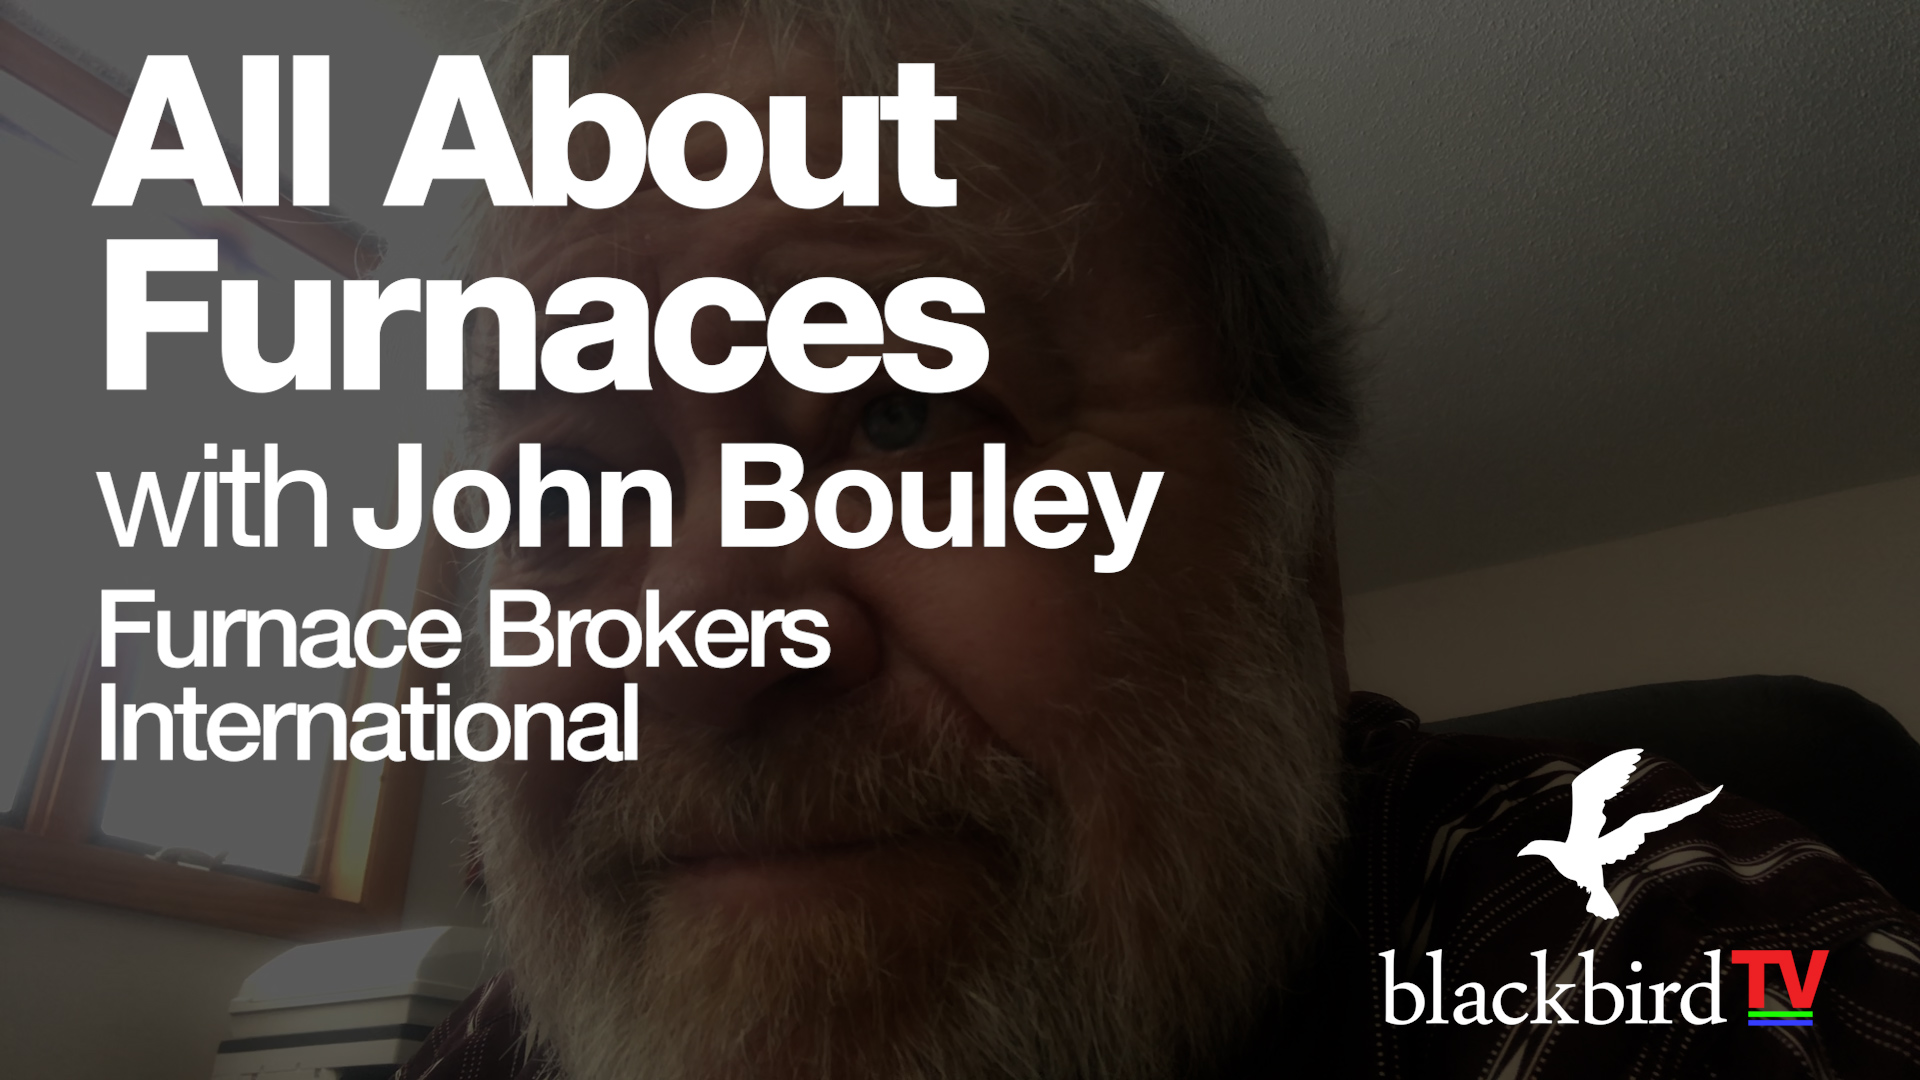 All About Furnaces with John Bouley